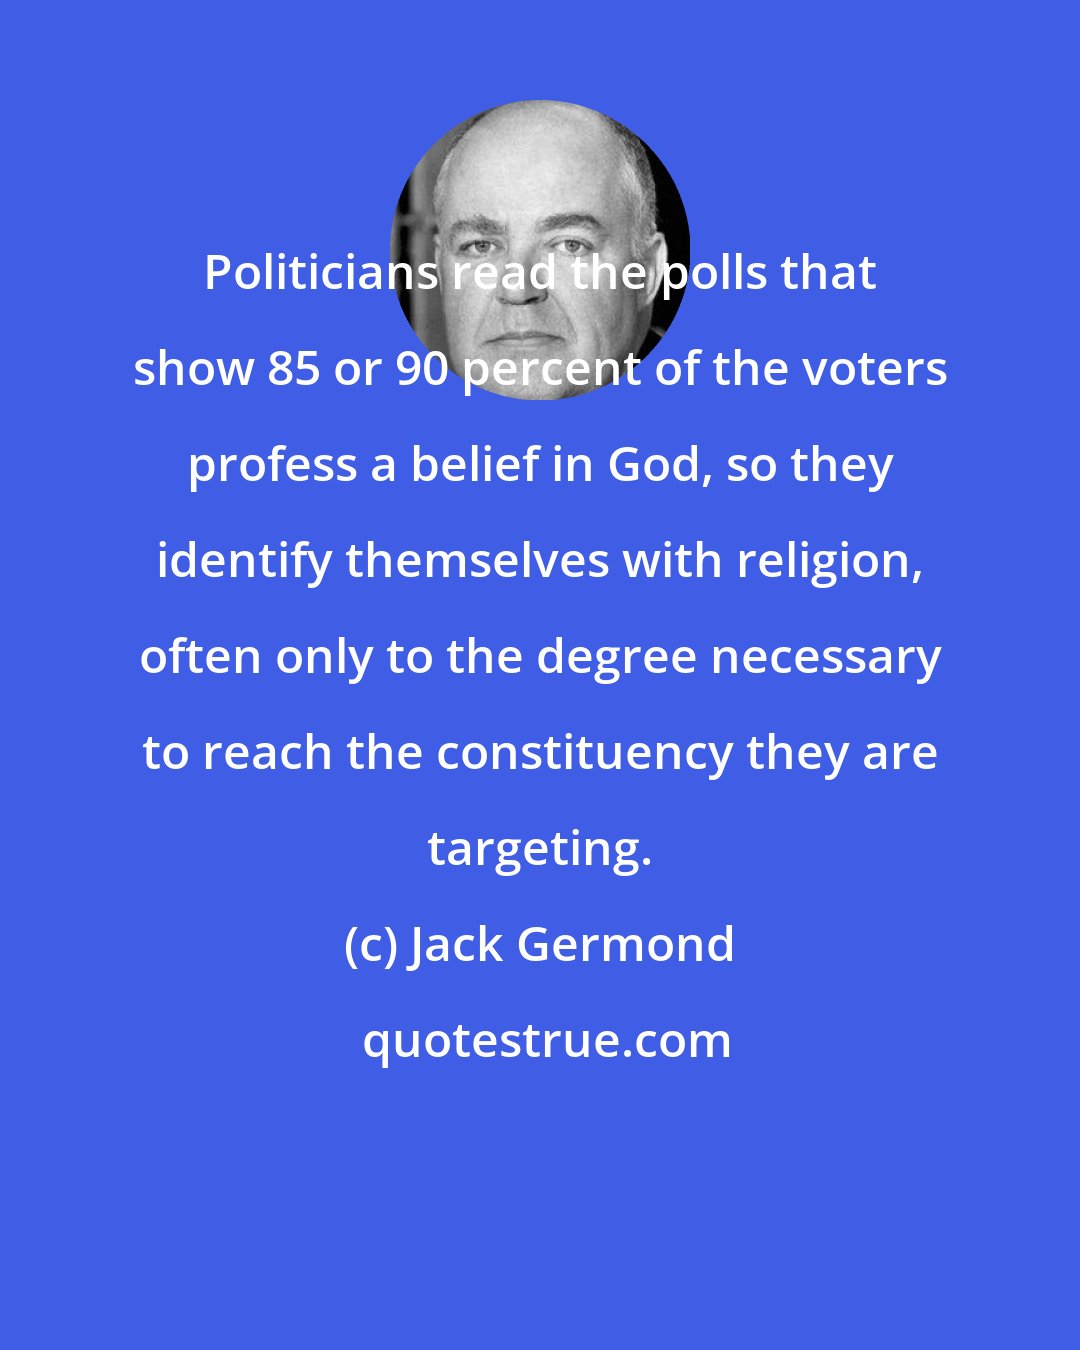 Jack Germond: Politicians read the polls that show 85 or 90 percent of the voters profess a belief in God, so they identify themselves with religion, often only to the degree necessary to reach the constituency they are targeting.